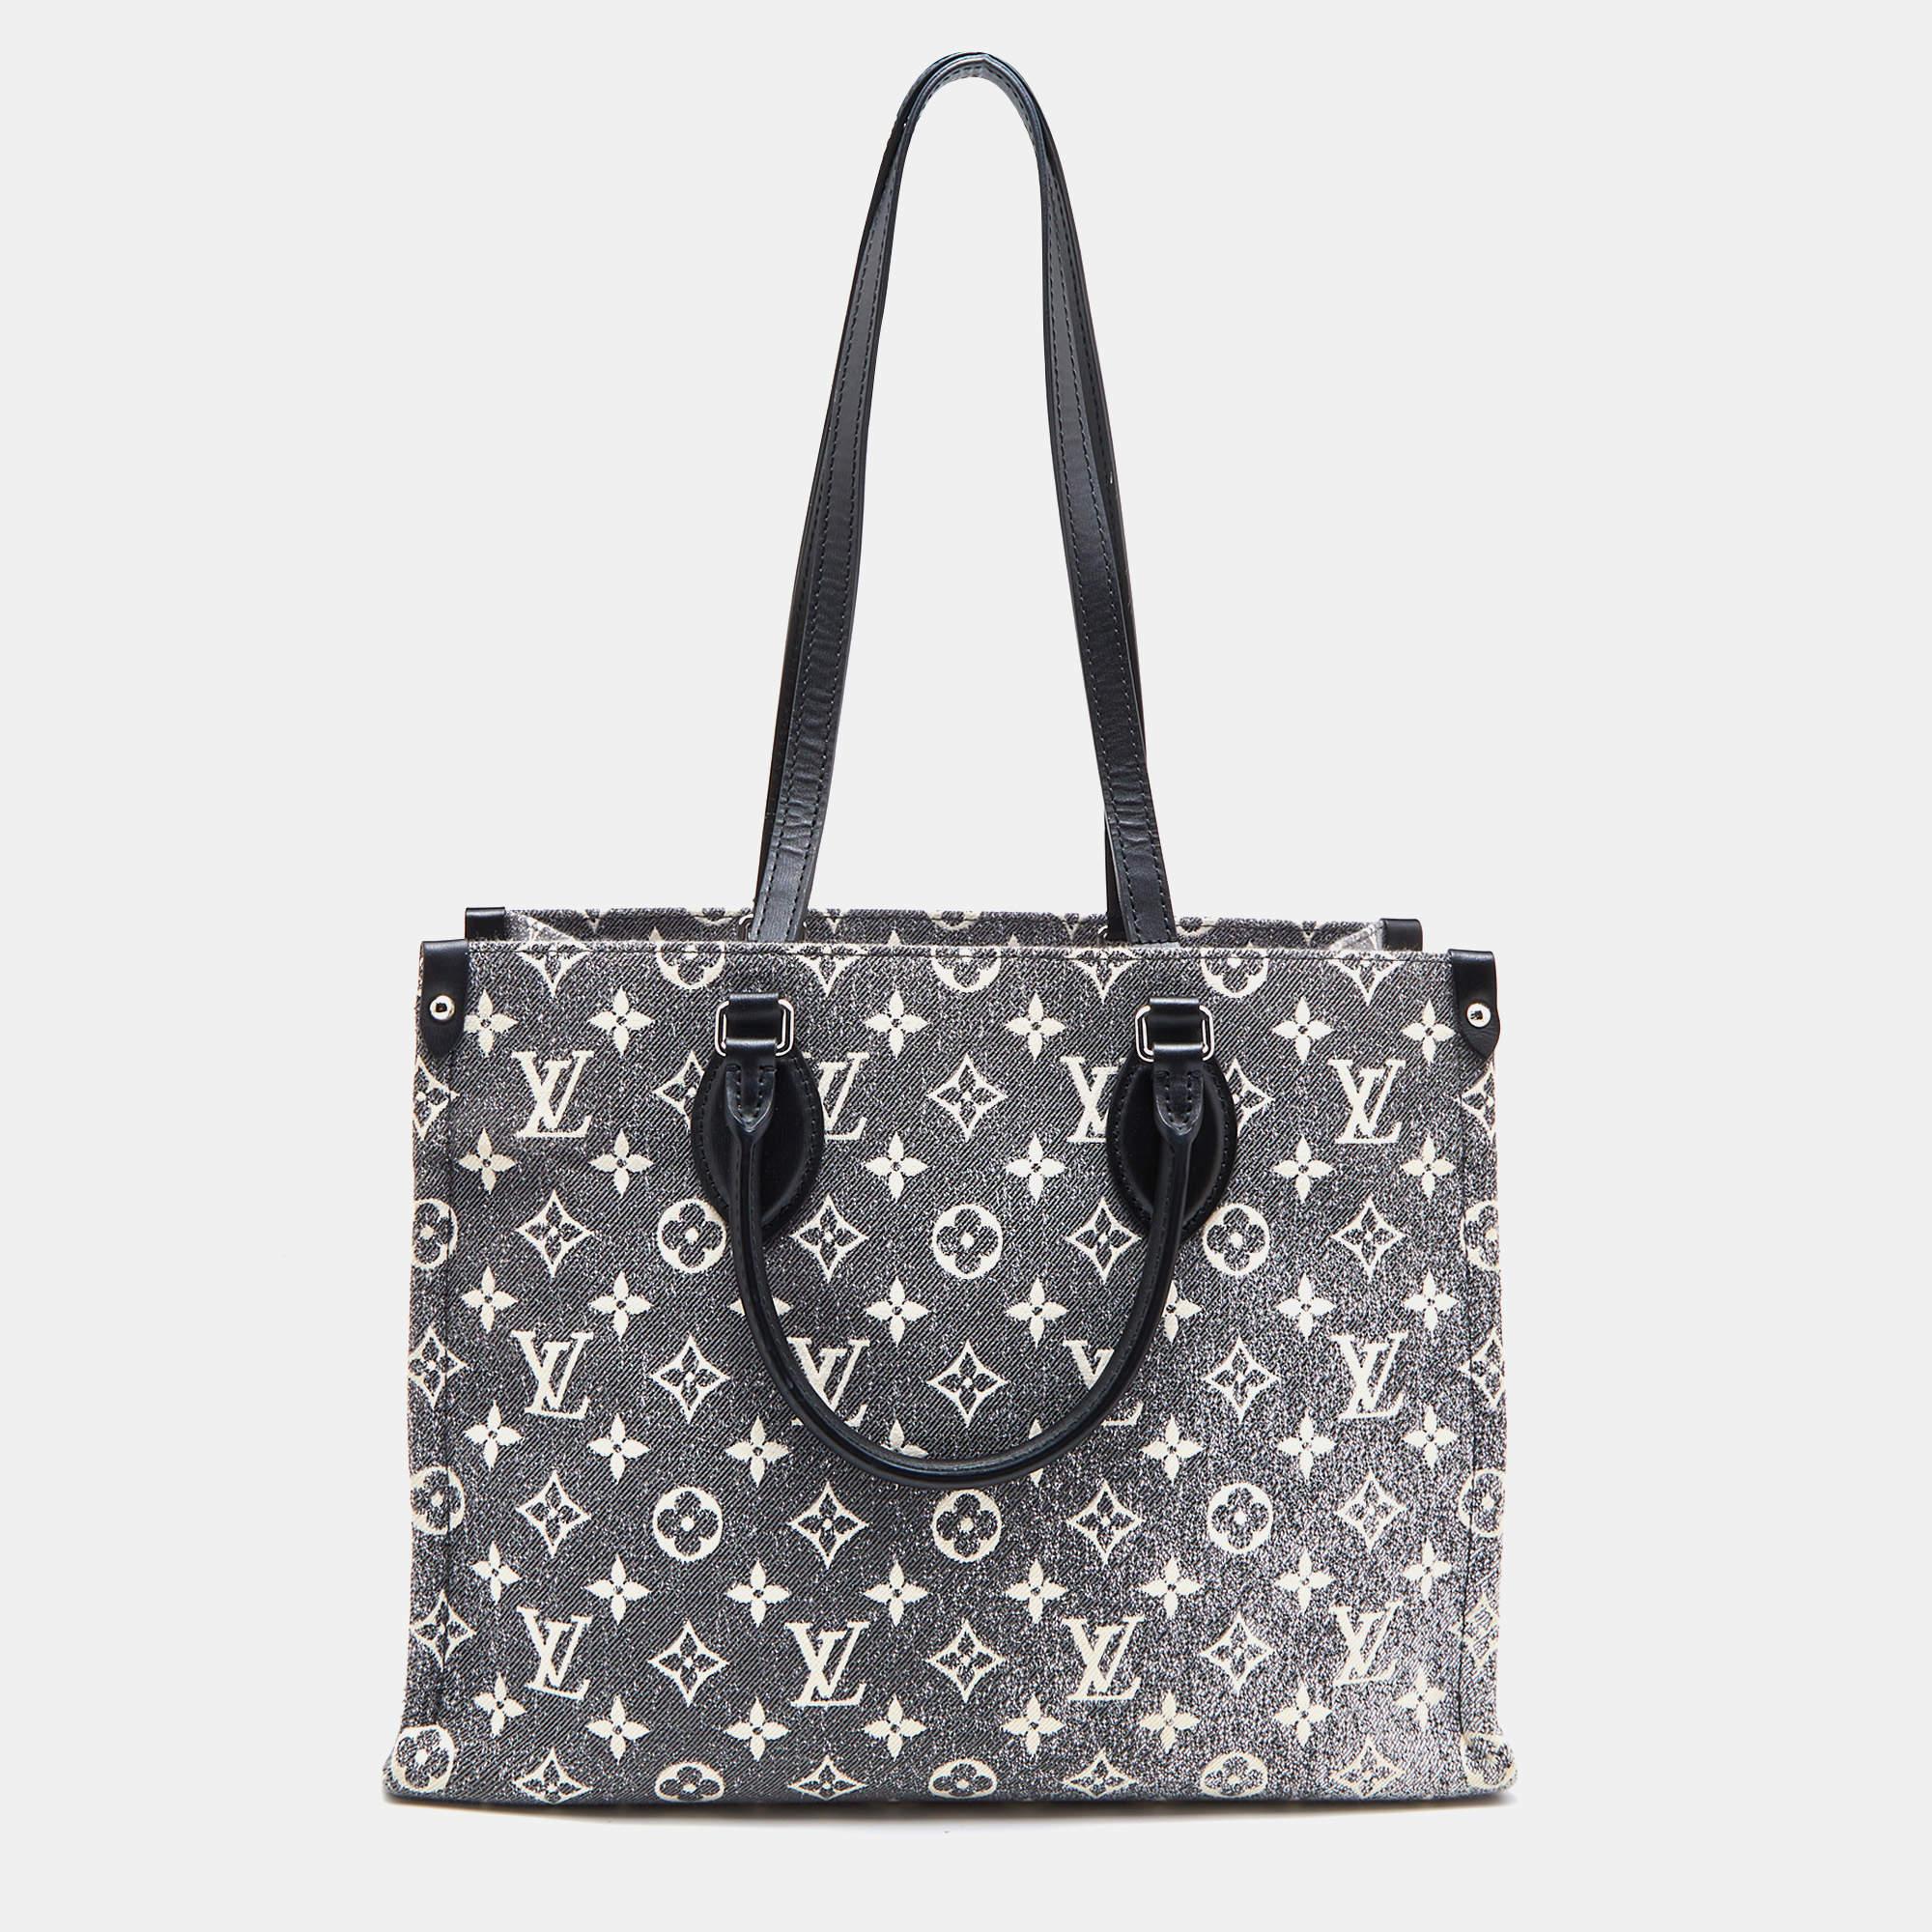 This Onthego bag easily delivers on the sophisticated charm of Louis Vuitton. This creation has been beautifully crafted from bicolor Monogram Denim and leather. The interior is lined with denim and sized to hold all your essentials. The bag is